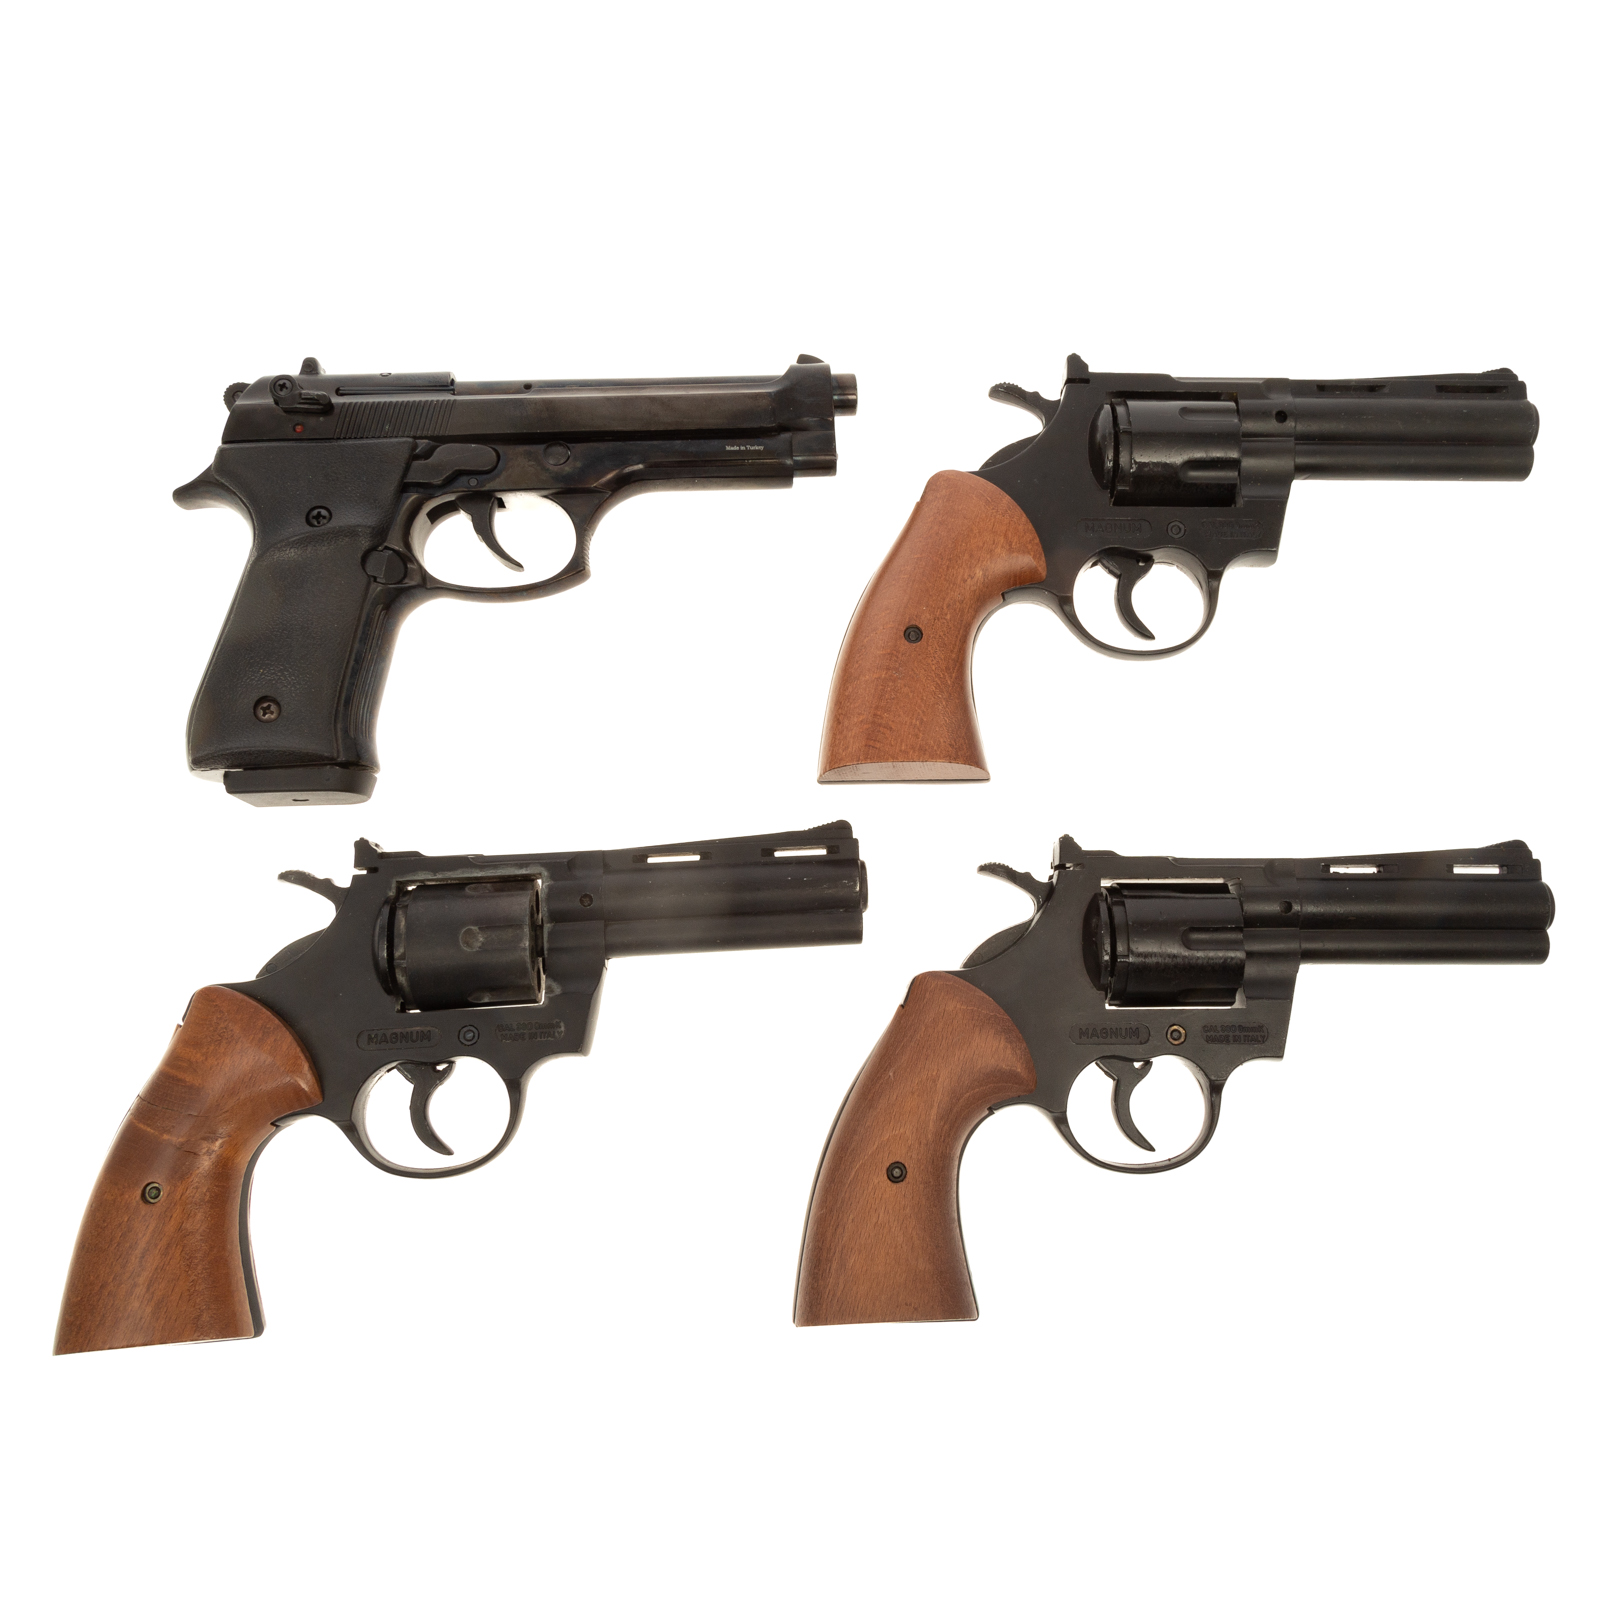 FOUR STARTER PISTOLS WITH CASES